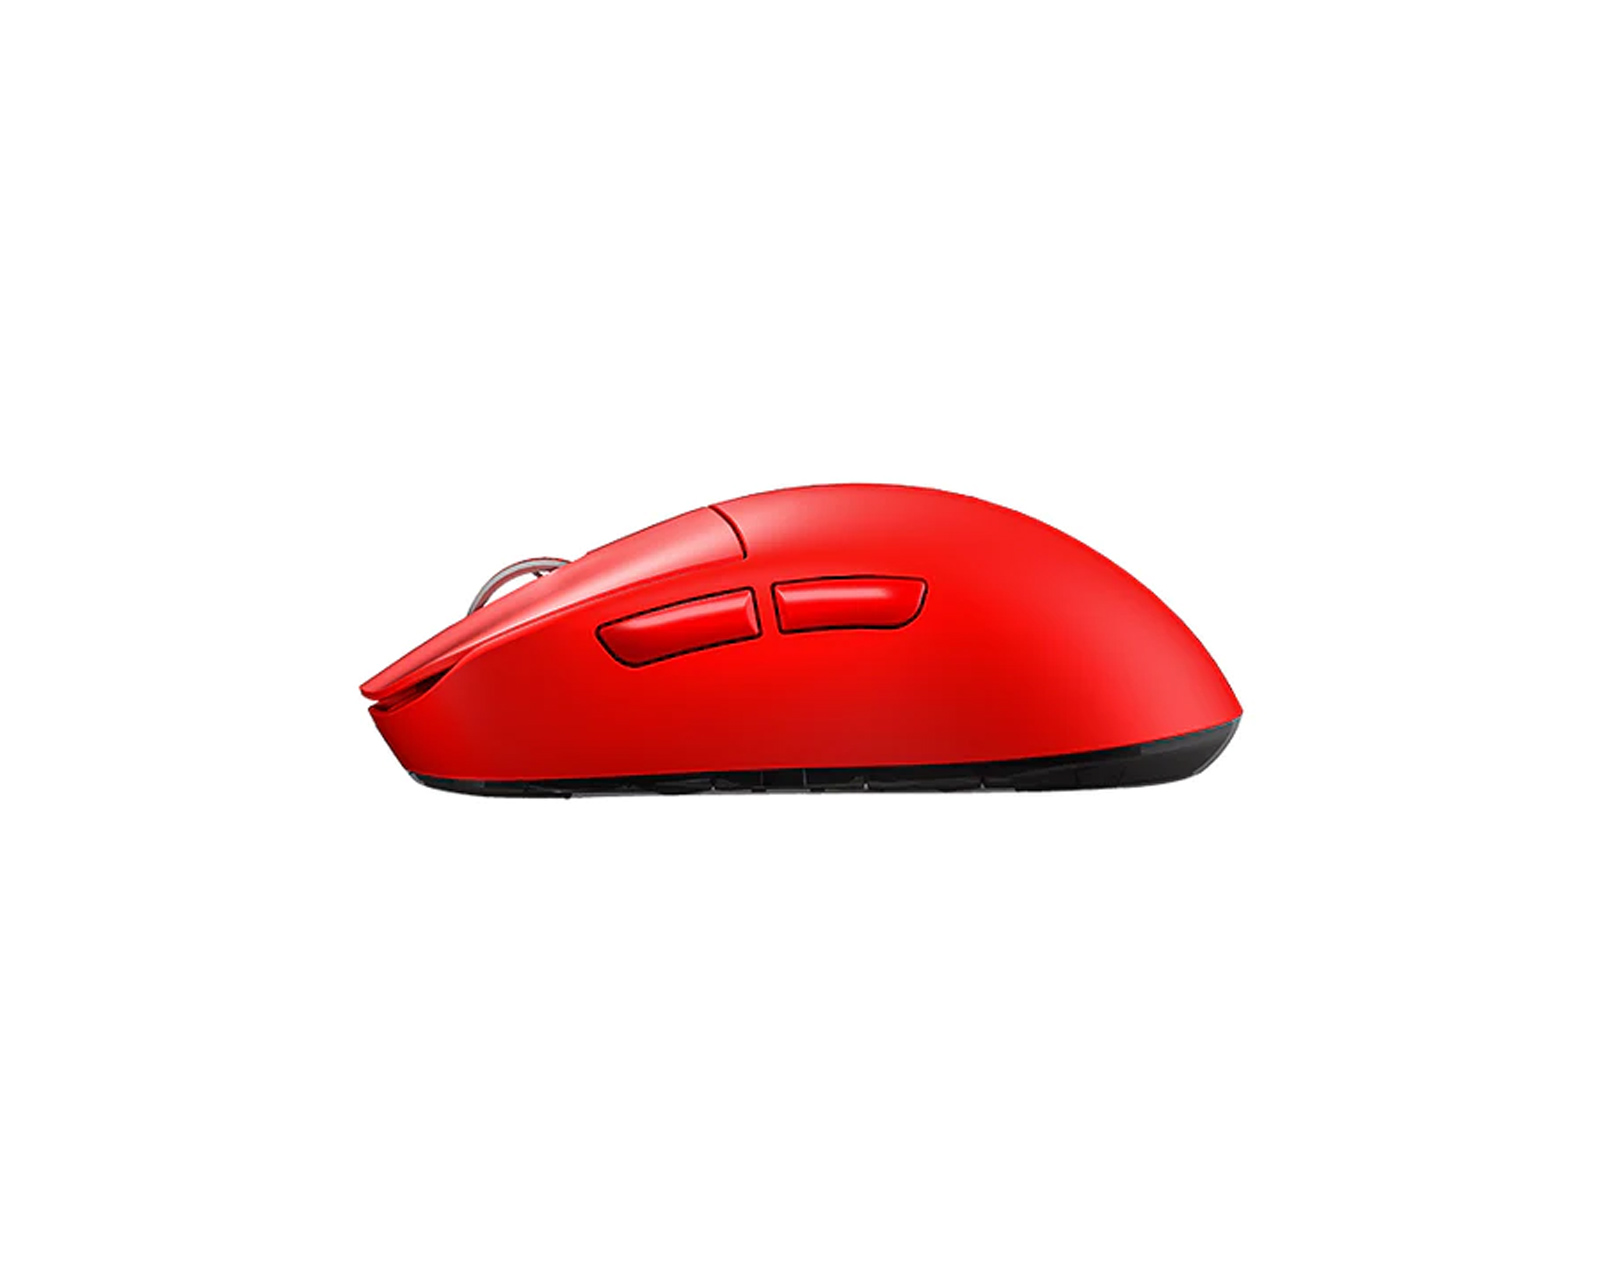 Sprime PM1 Wireless Ergo Gaming Mouse - Red